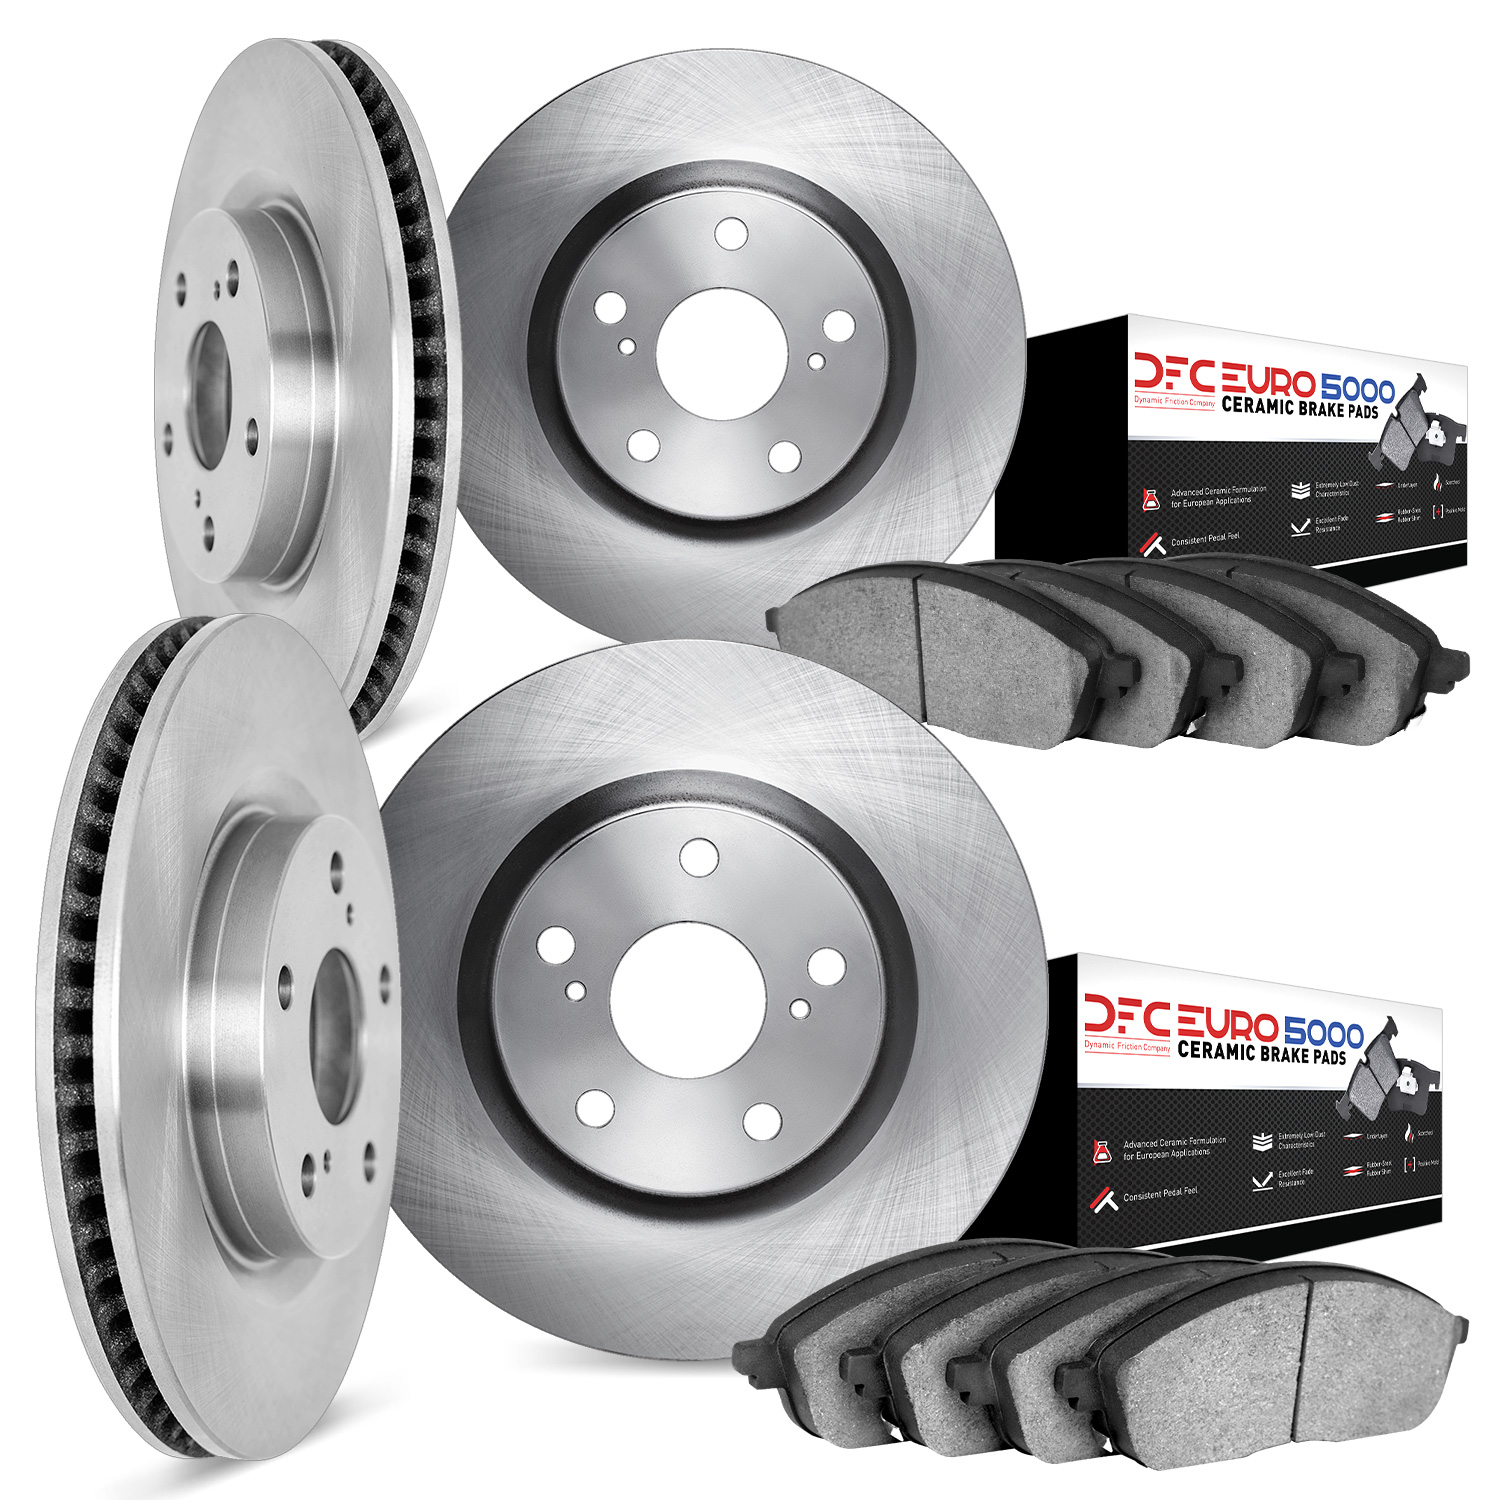 6604-31031 Brake Rotors w/5000 Euro Ceramic Brake Pads, 2007-2019 BMW, Position: Front and Rear